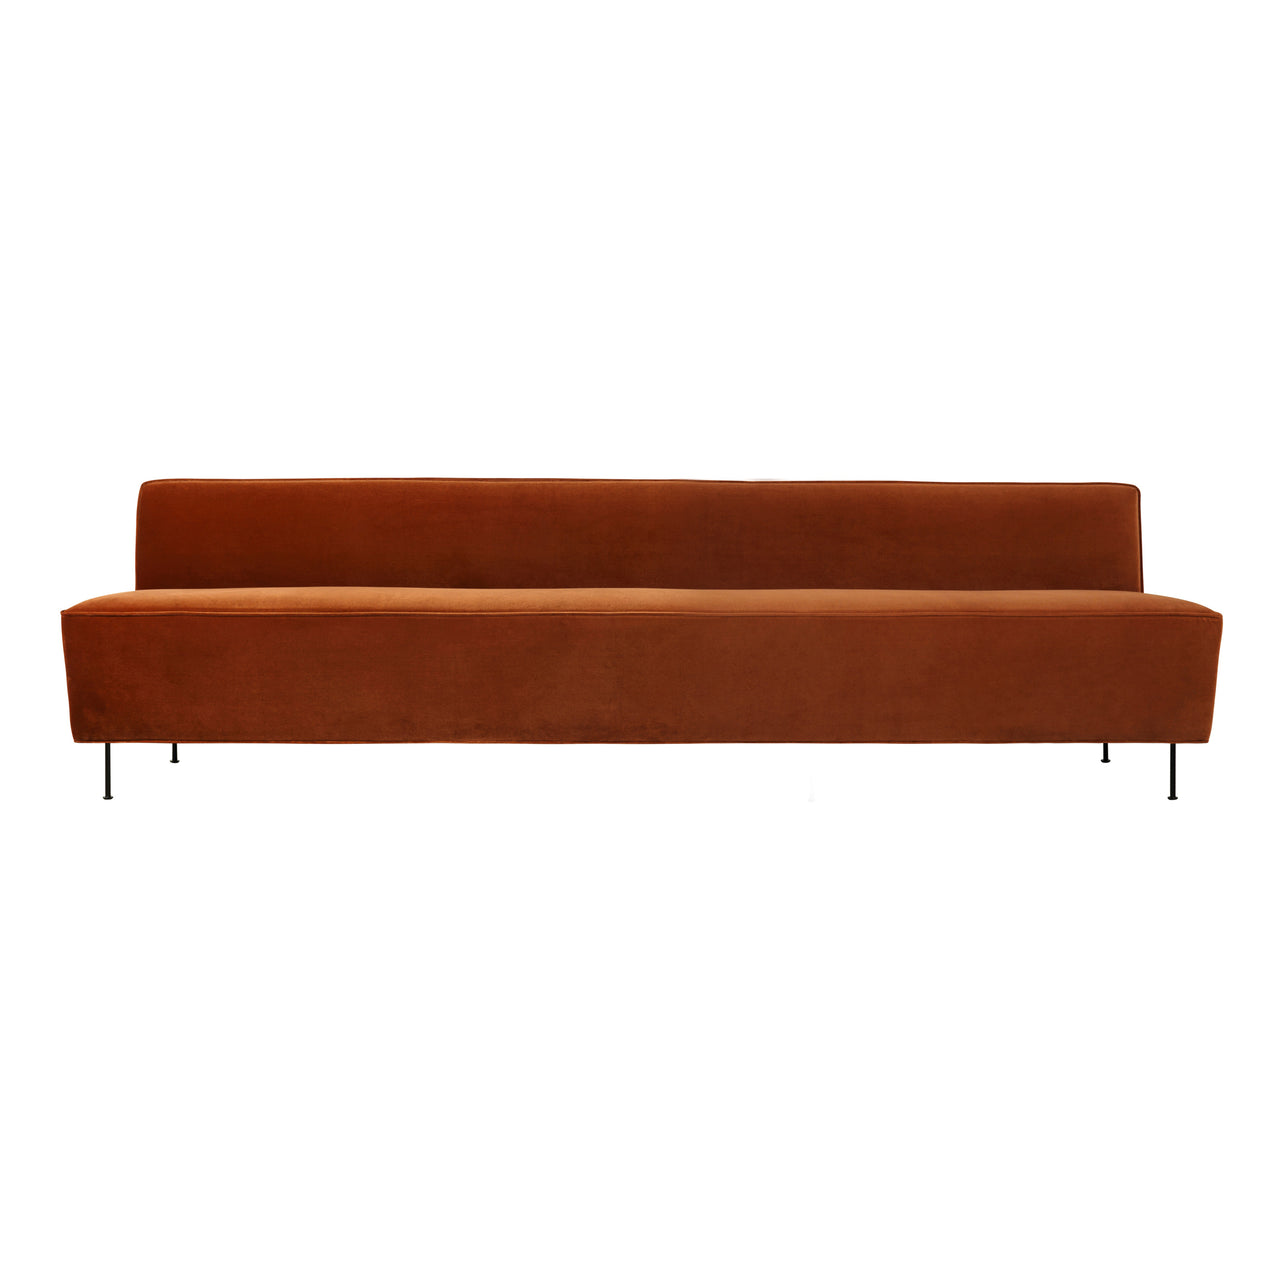 Modern Line Sofa: Dining Height + Large - 110.2